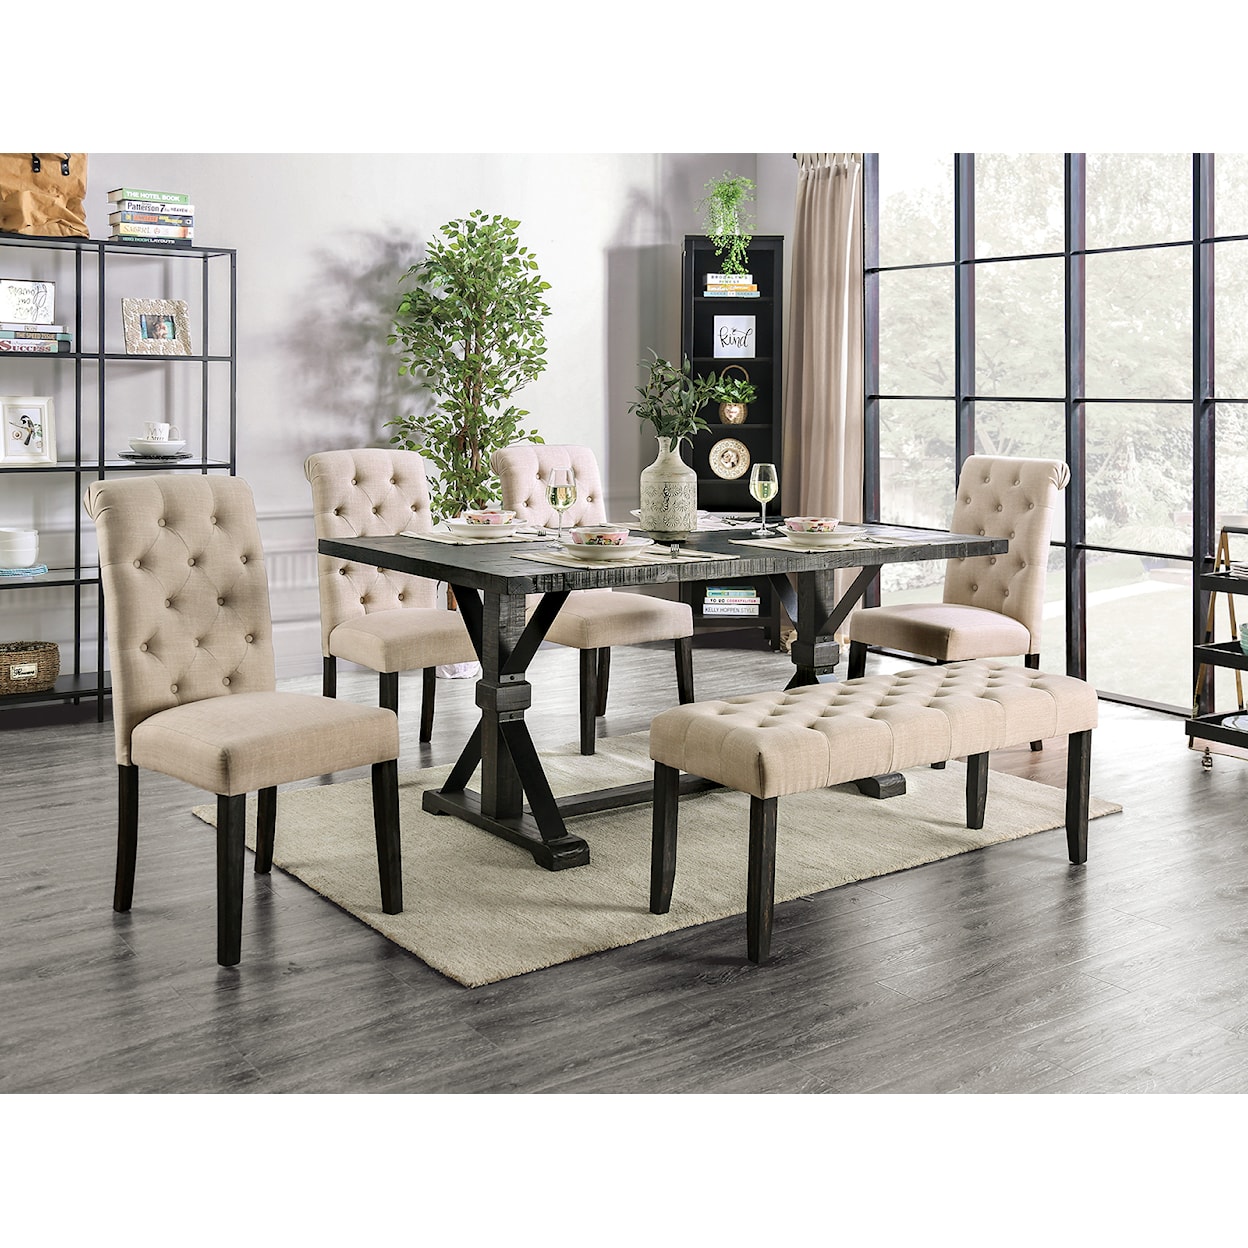 Furniture of America Alfred 6 Pc. Dining Table Set W/ Bench